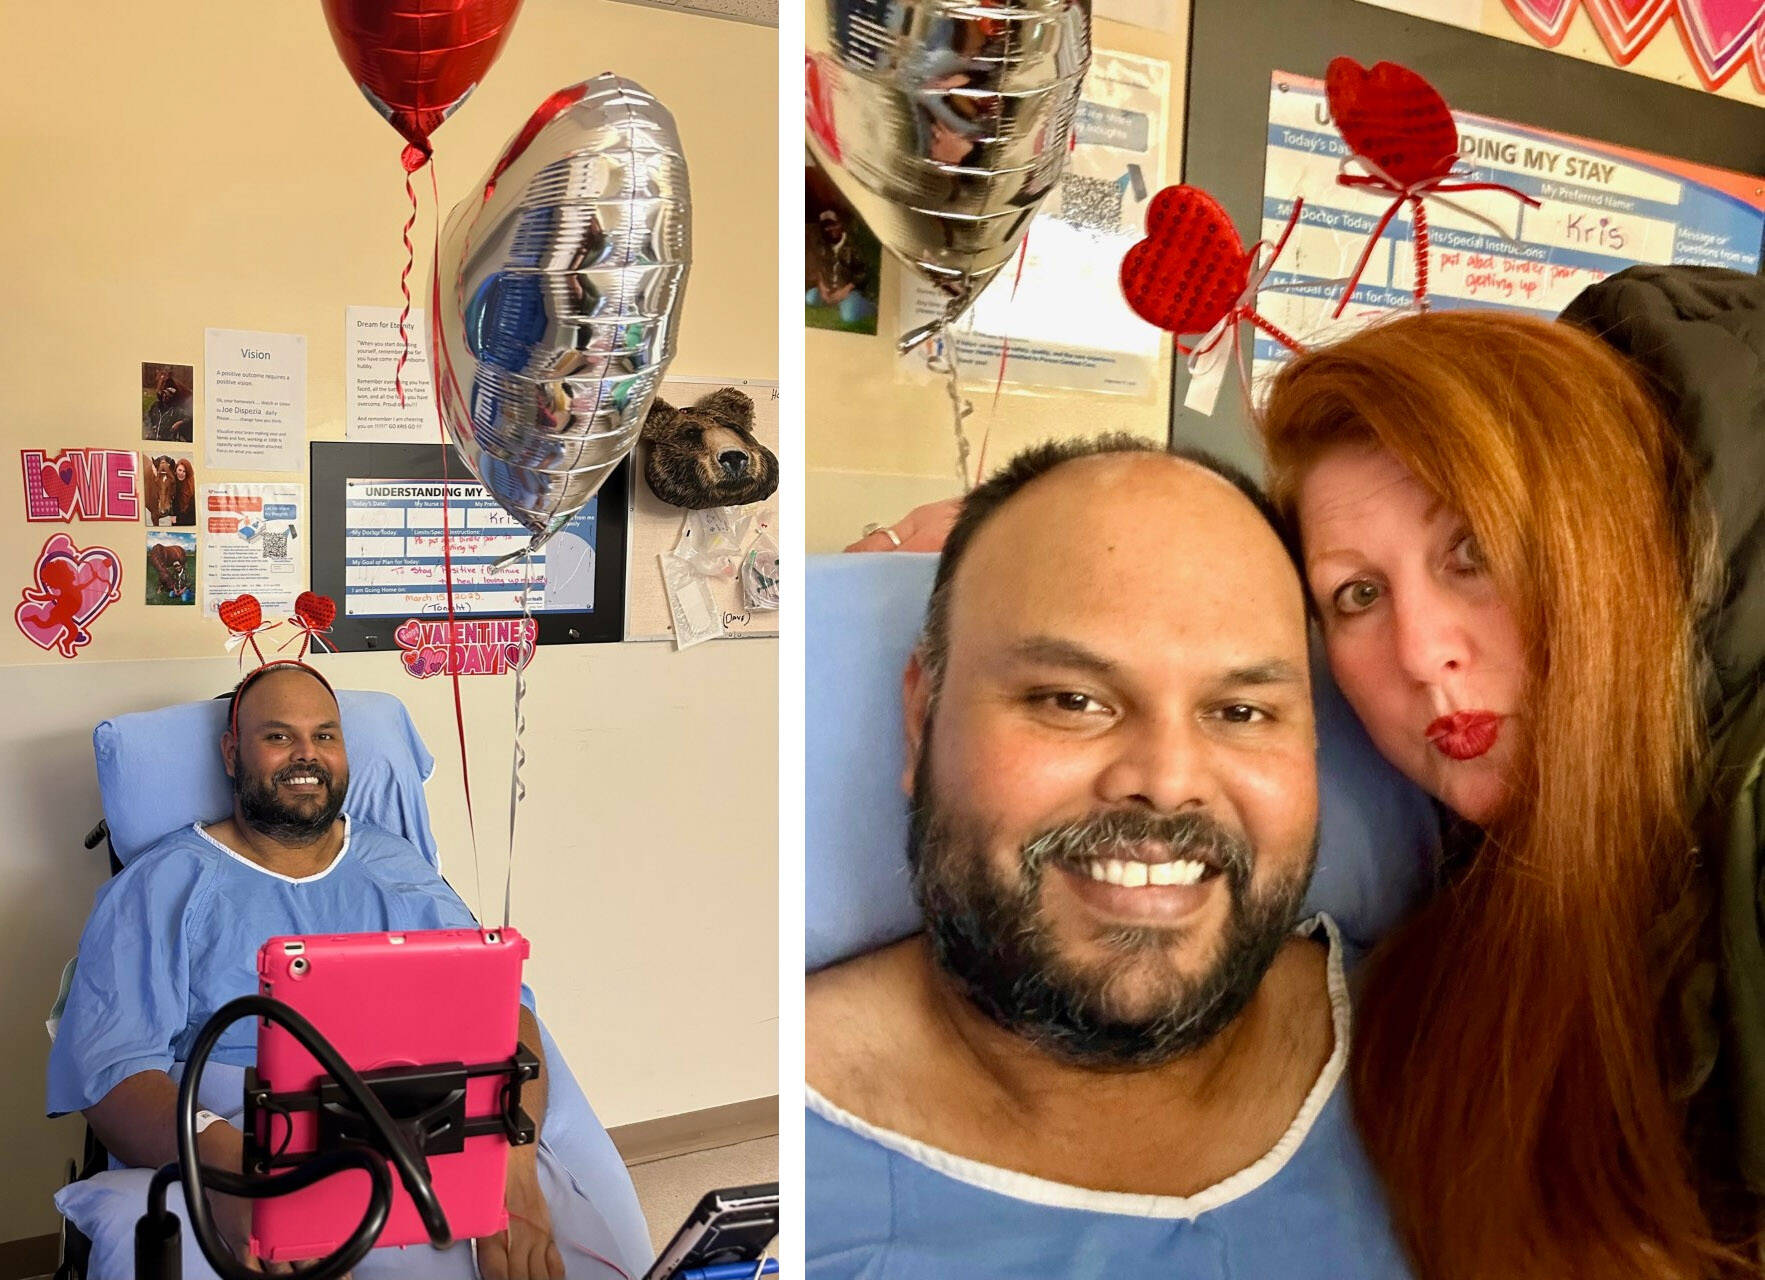 Kris Mallisetty, seen here with wife Leah Gray, was paralyzed from the neck down during surgery on his spine on Jan. 27. Because he doesn’t qualify for Persons With Disability funding, a friend has set up a fundraiser to help pay for the costs of making his home wheelchair-accessible. Gray has been visiting him every day and decorated his room for Valentine’s Day. (Leah Gray photo)